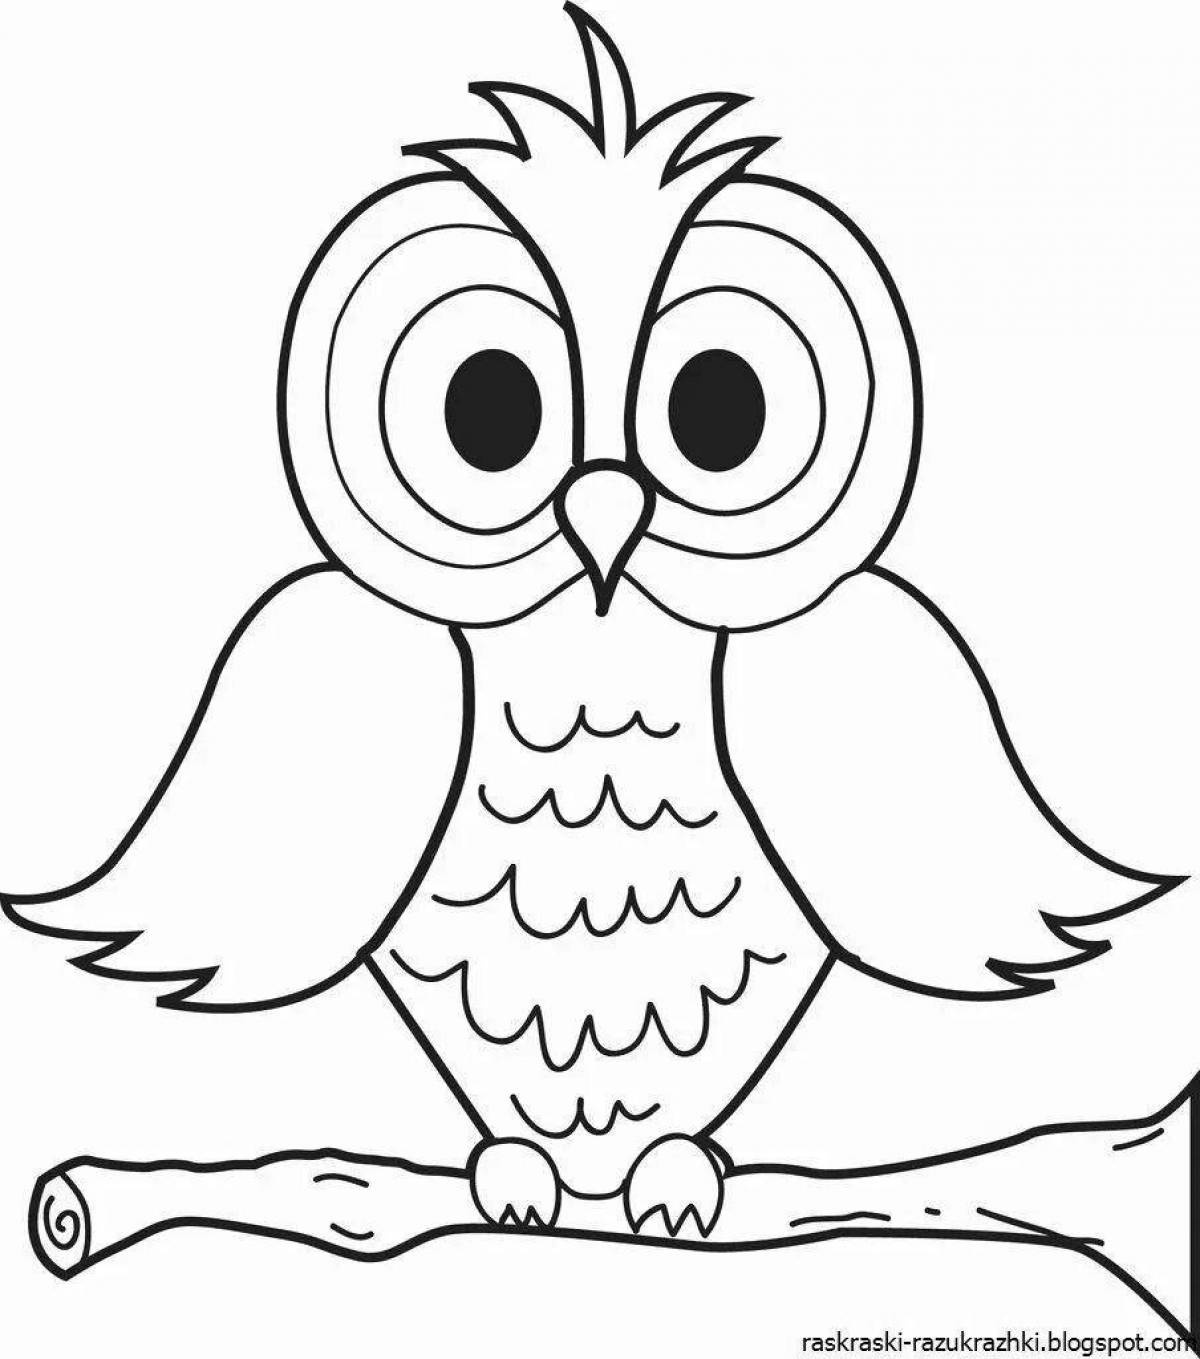 Colorful owl coloring page for kids